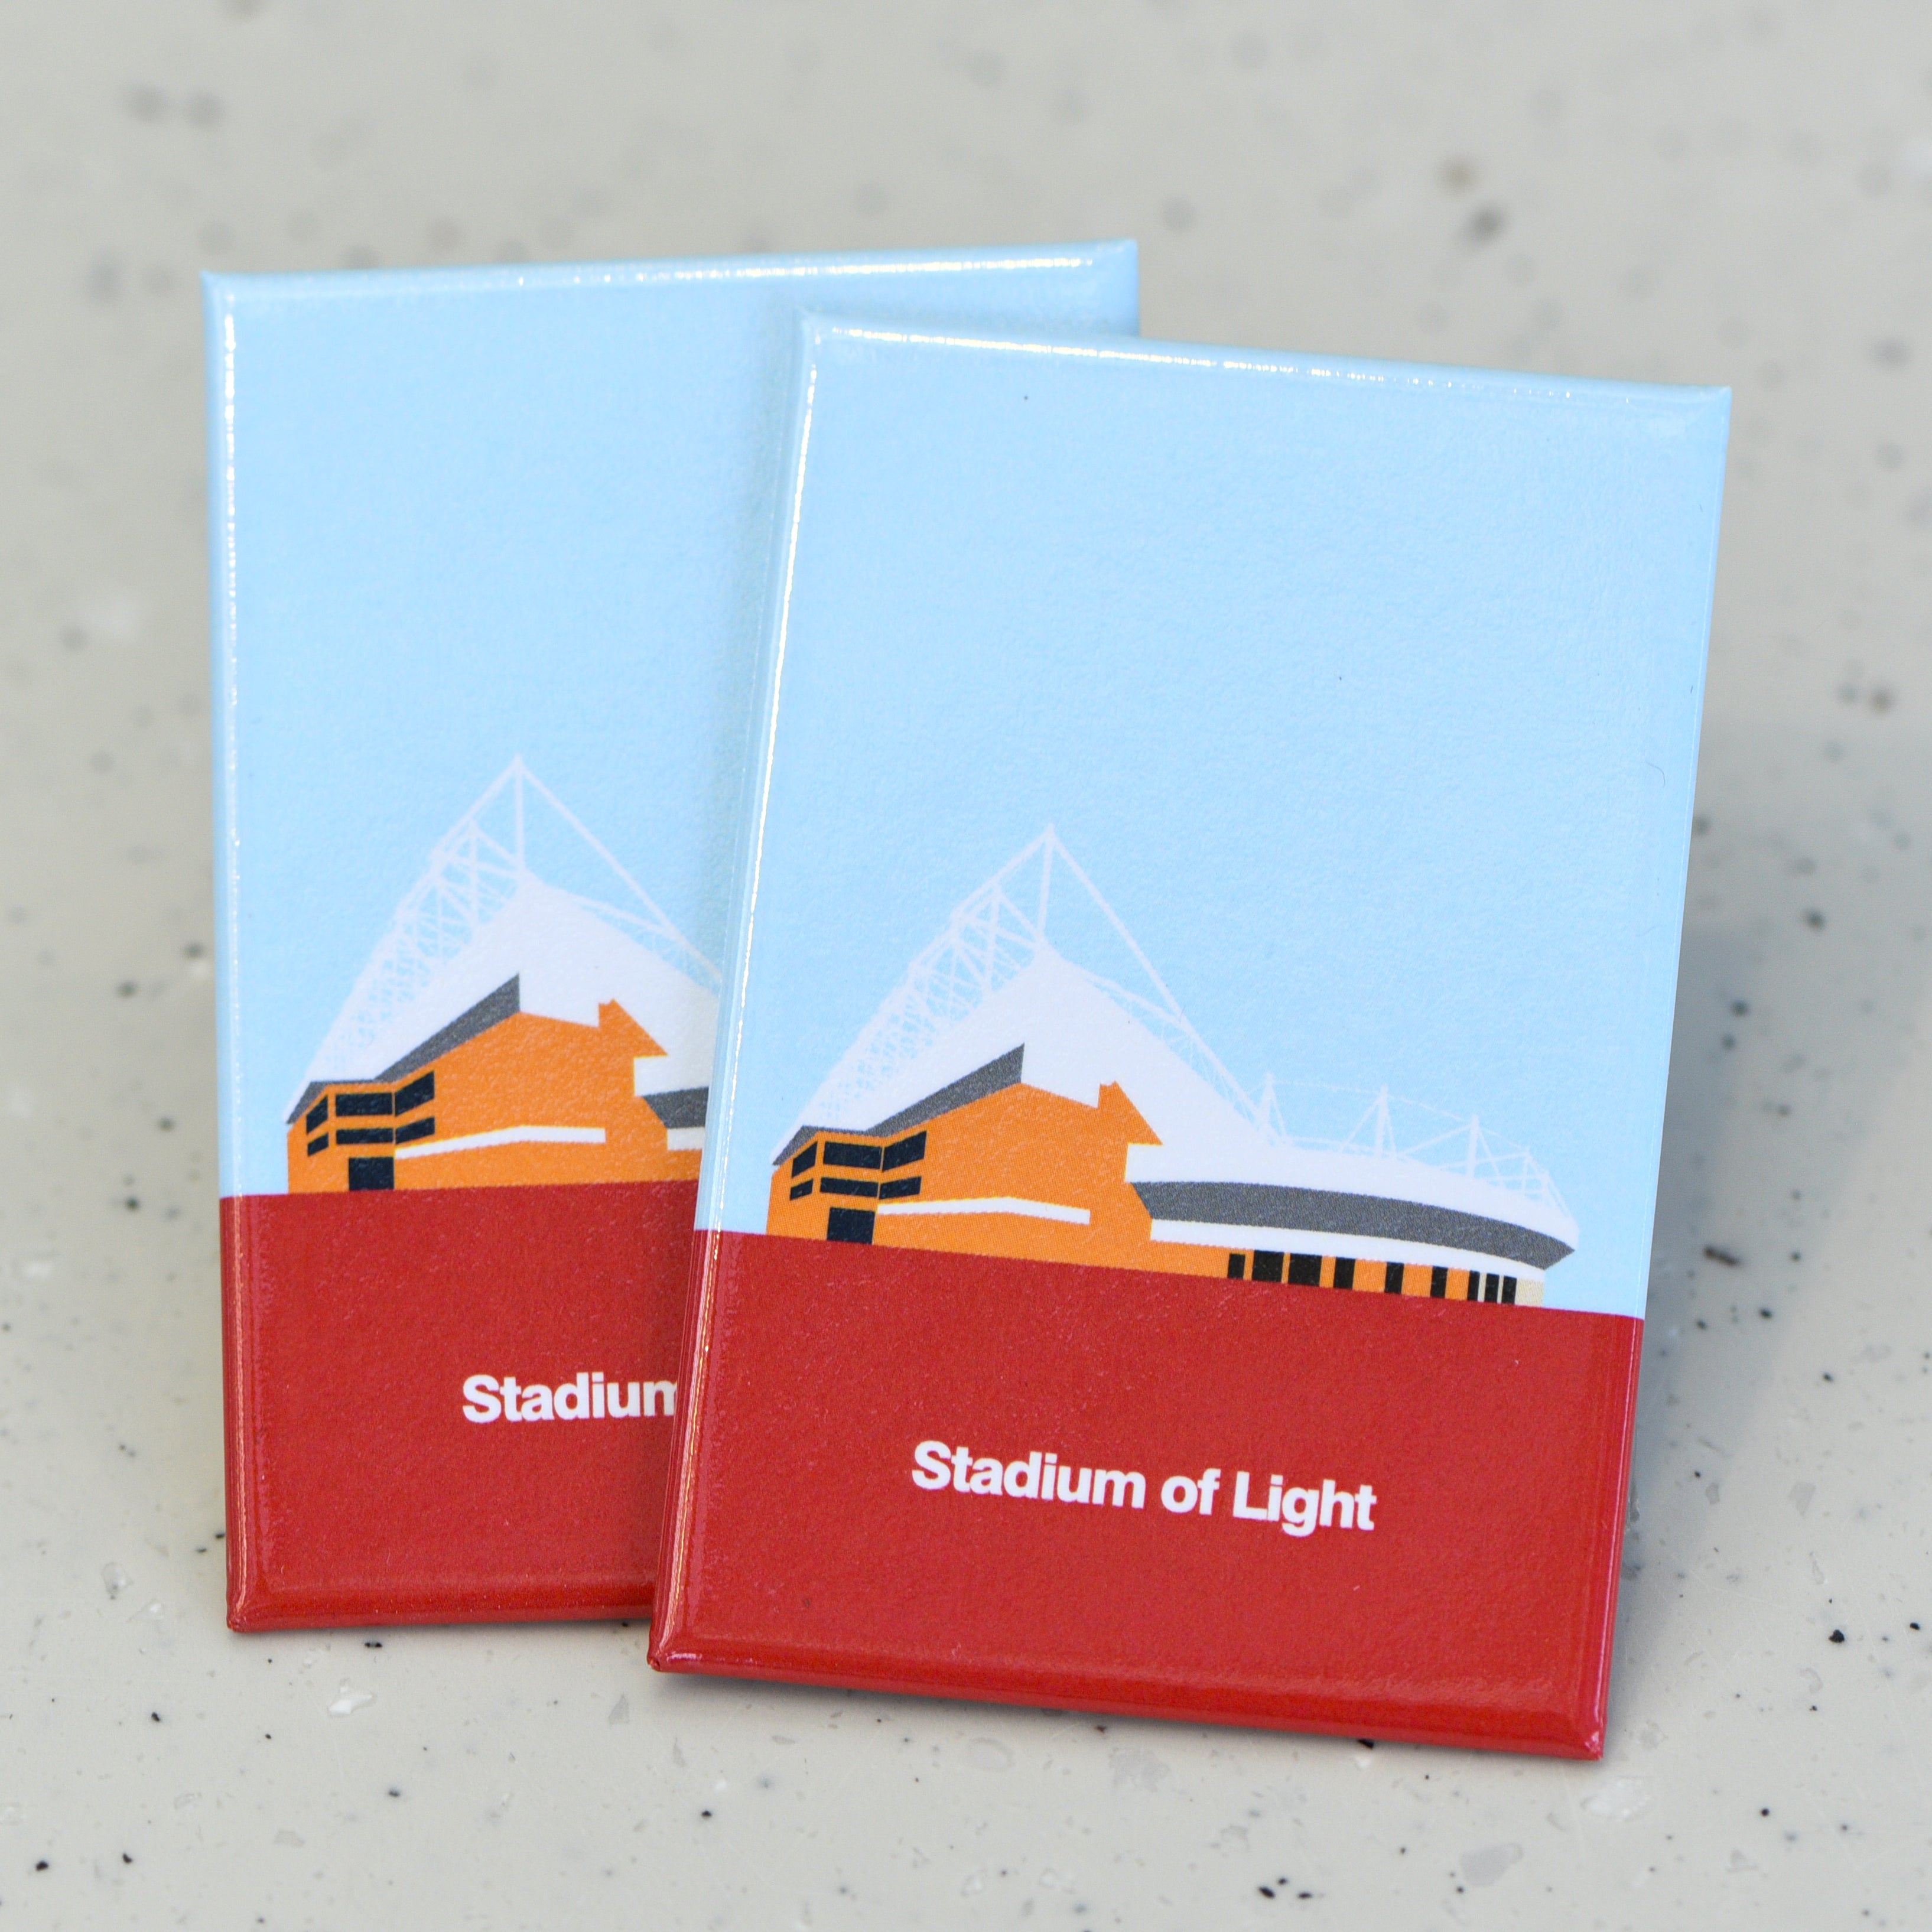 Two flat rectangle magnets featuring a colourful graphic illustration of a football stadium in orange, grey and white against a pale blue sky. A large section of solid red at the bottom of the magnet contains white bold text that reads "Stadium of Light".